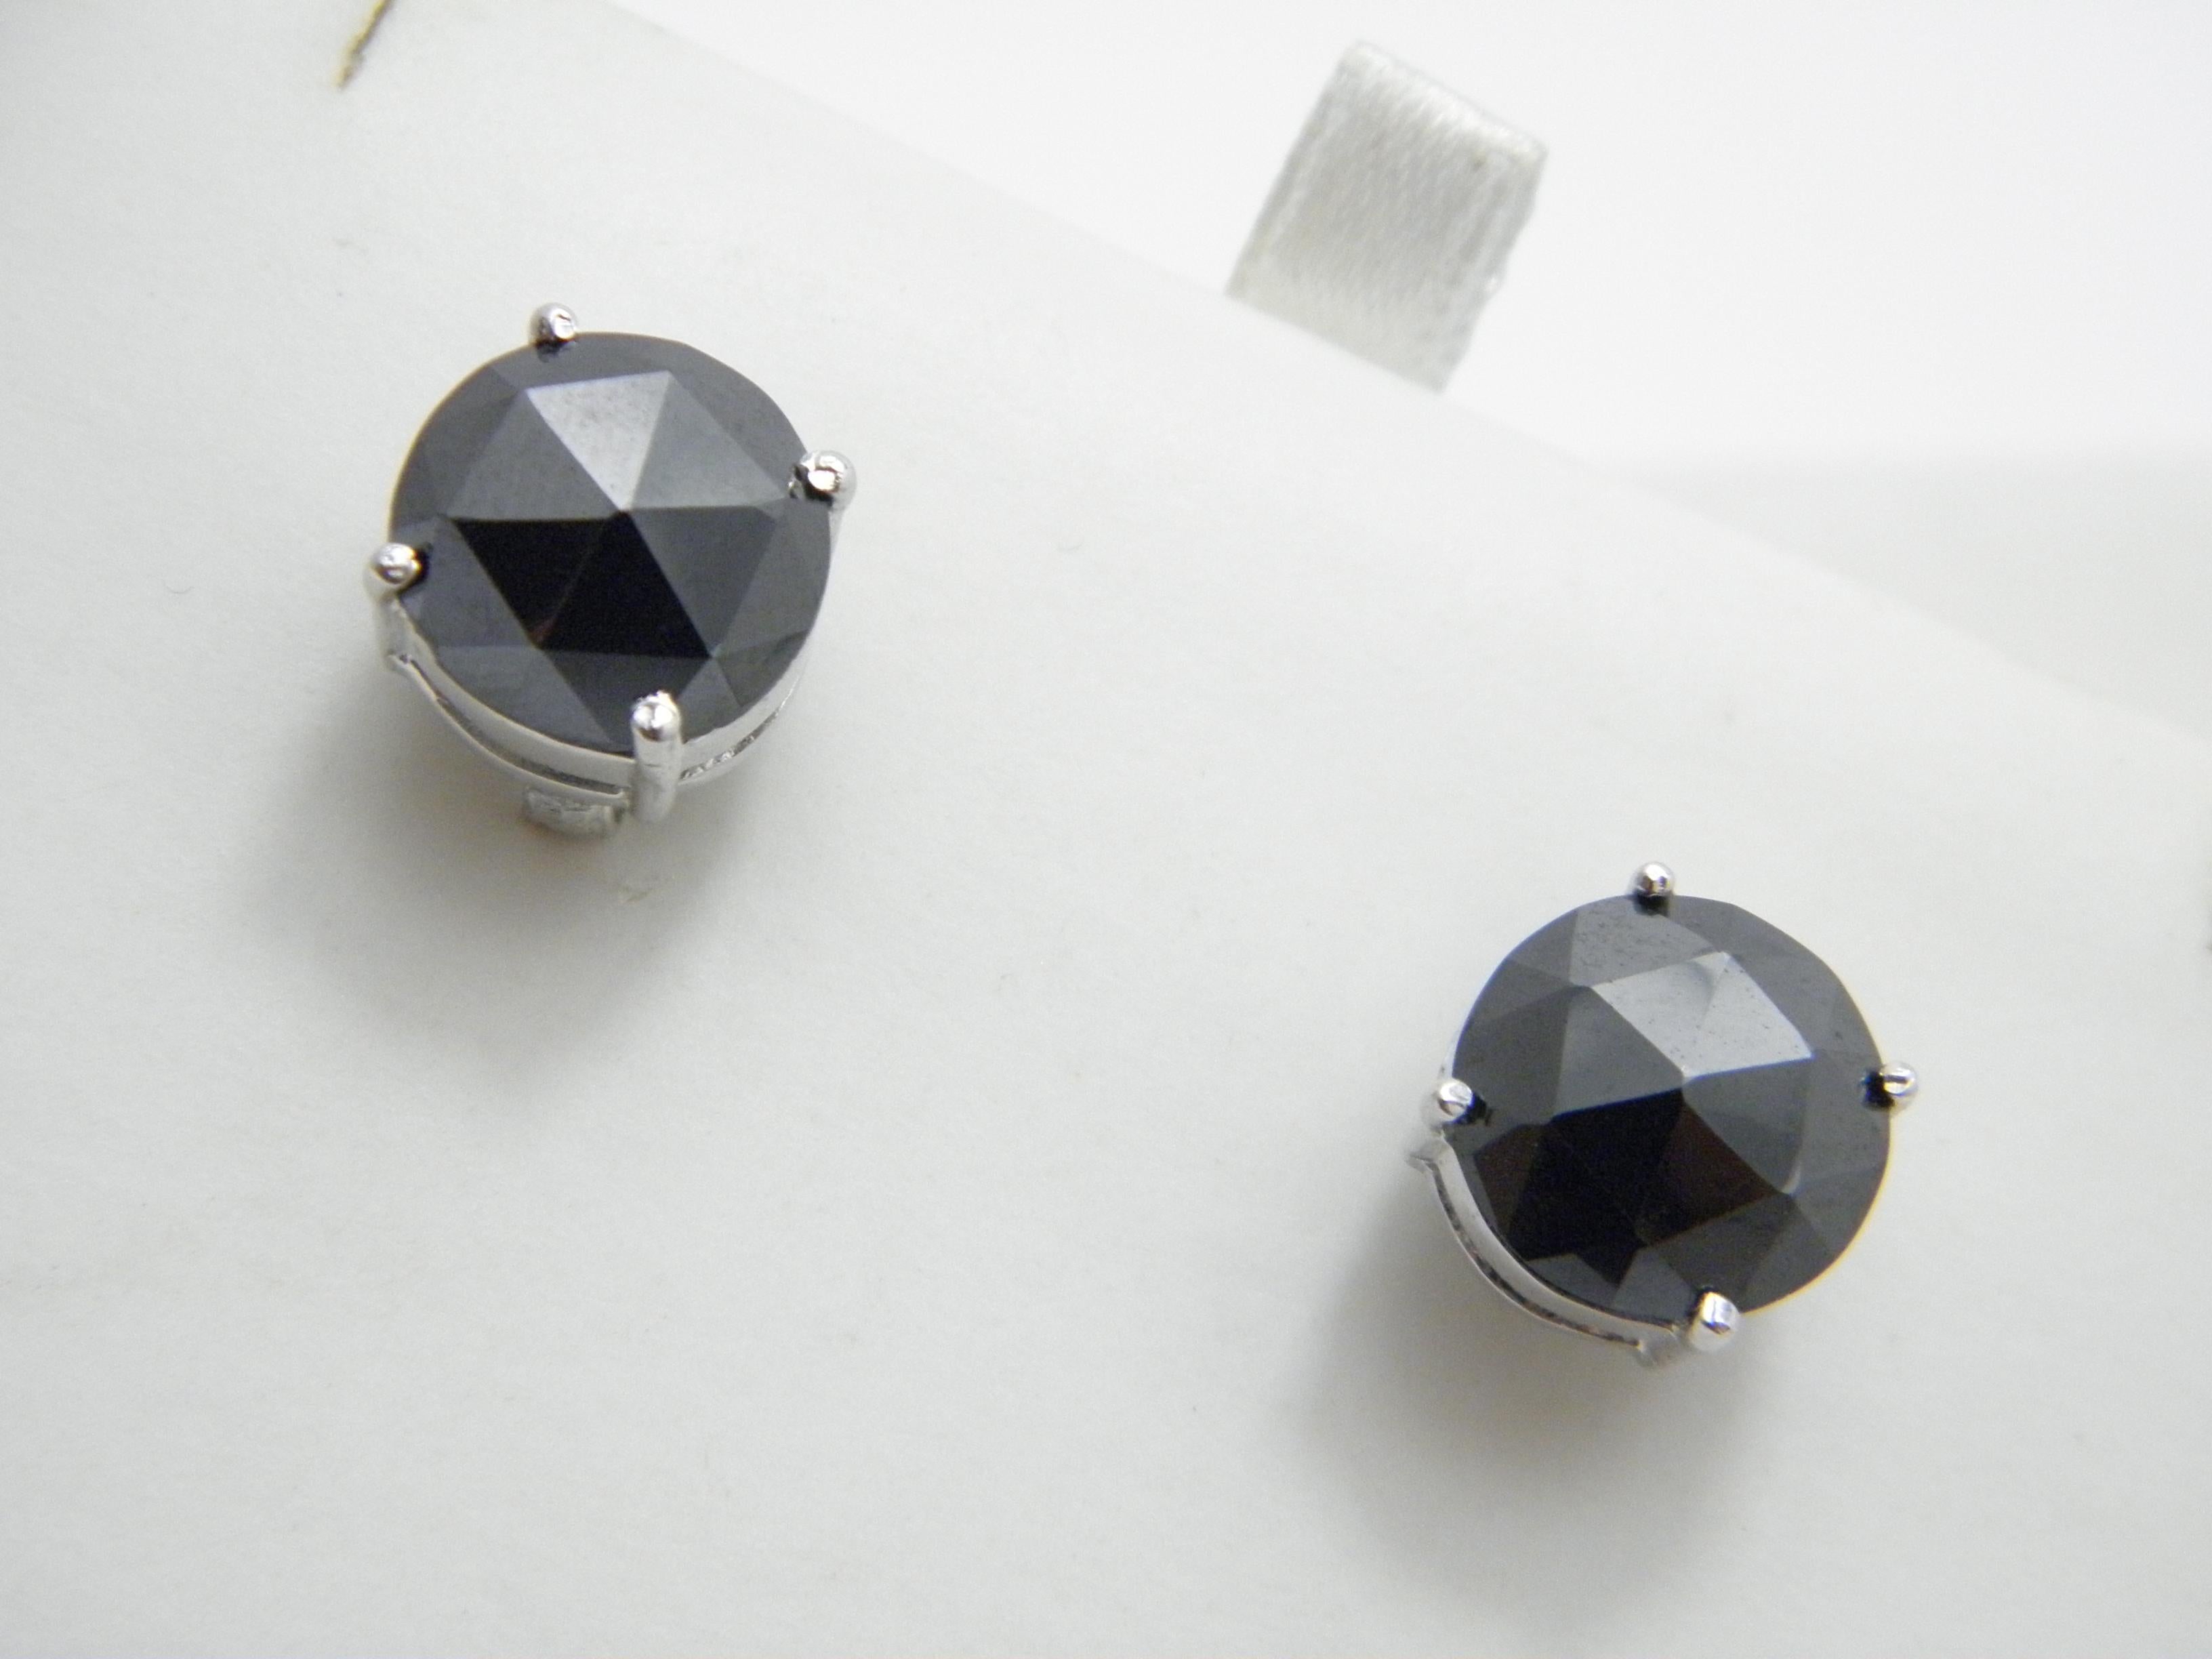 A very special item for you to consider:

LARGE STERLING SILVER 5.0 CARAT BLACK DIAMOND STUD EARRINGS

DETAILS
Material: 925/1000 Sterling Silver
Style: Bespoke made huge diamond stud earrings.
Gems: Round facet cut natural black diamonds (Australia